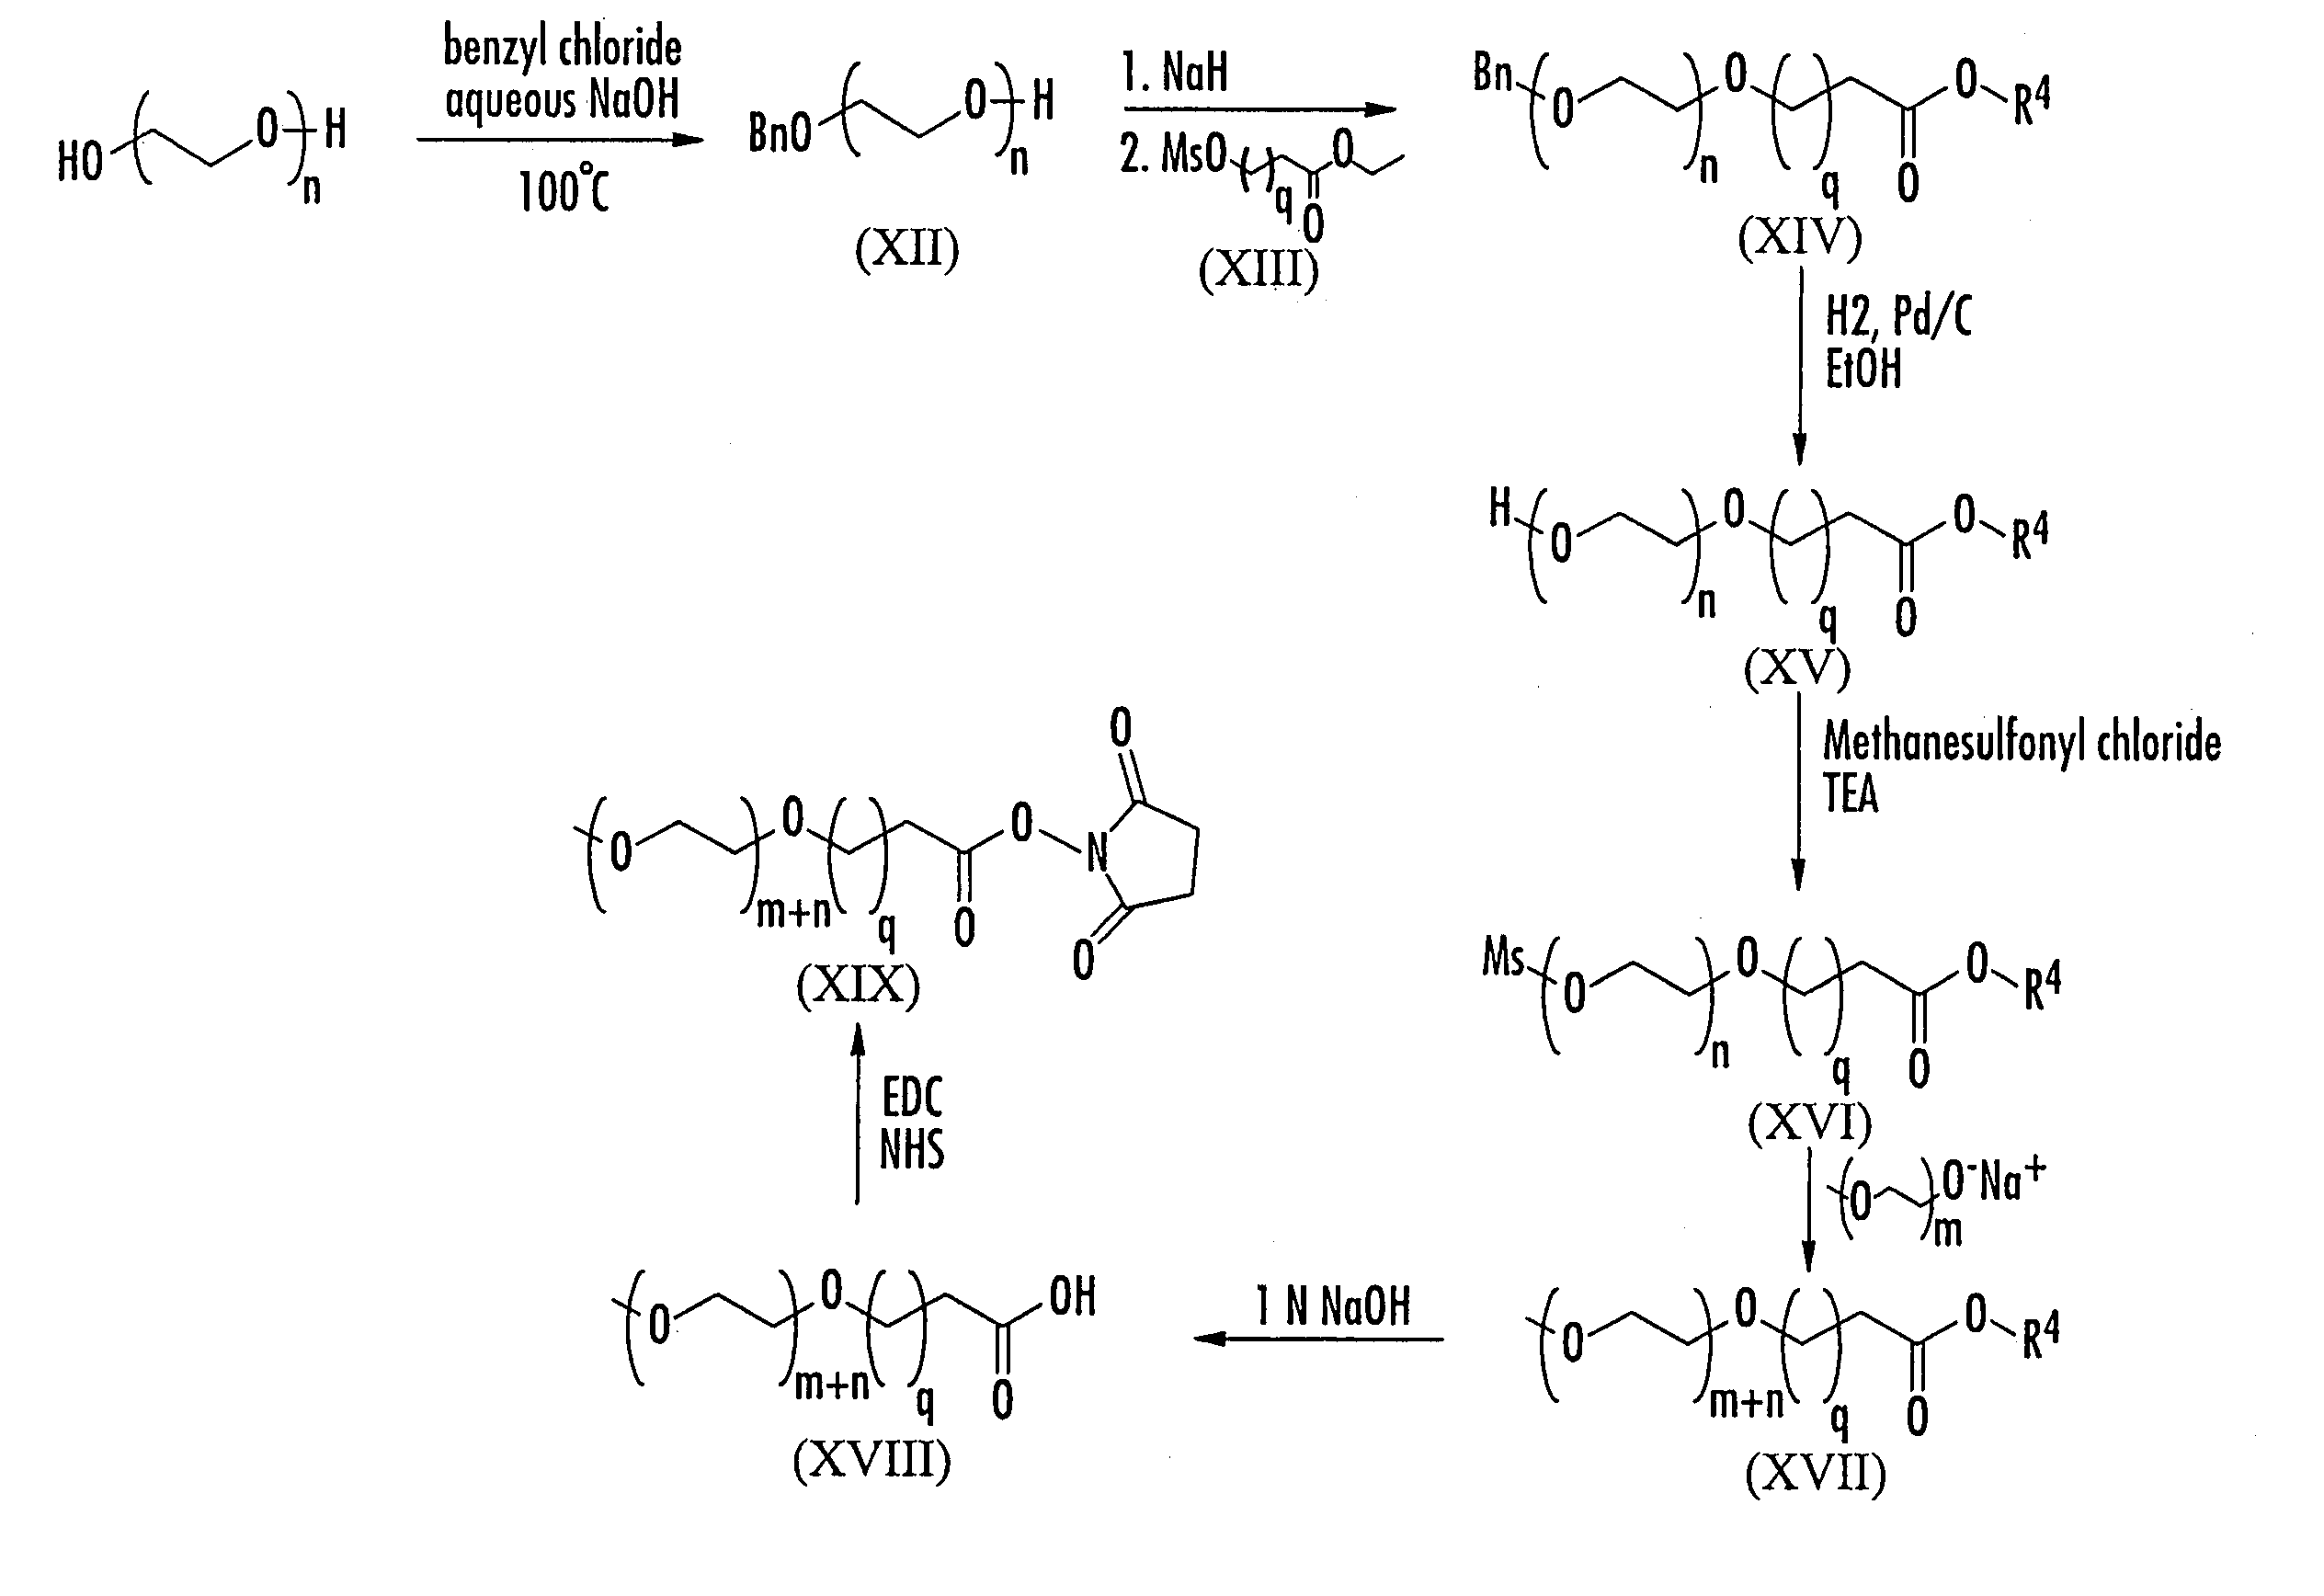 Substantially monodispersed mixtures of polymers having polyethylene glycol moieties